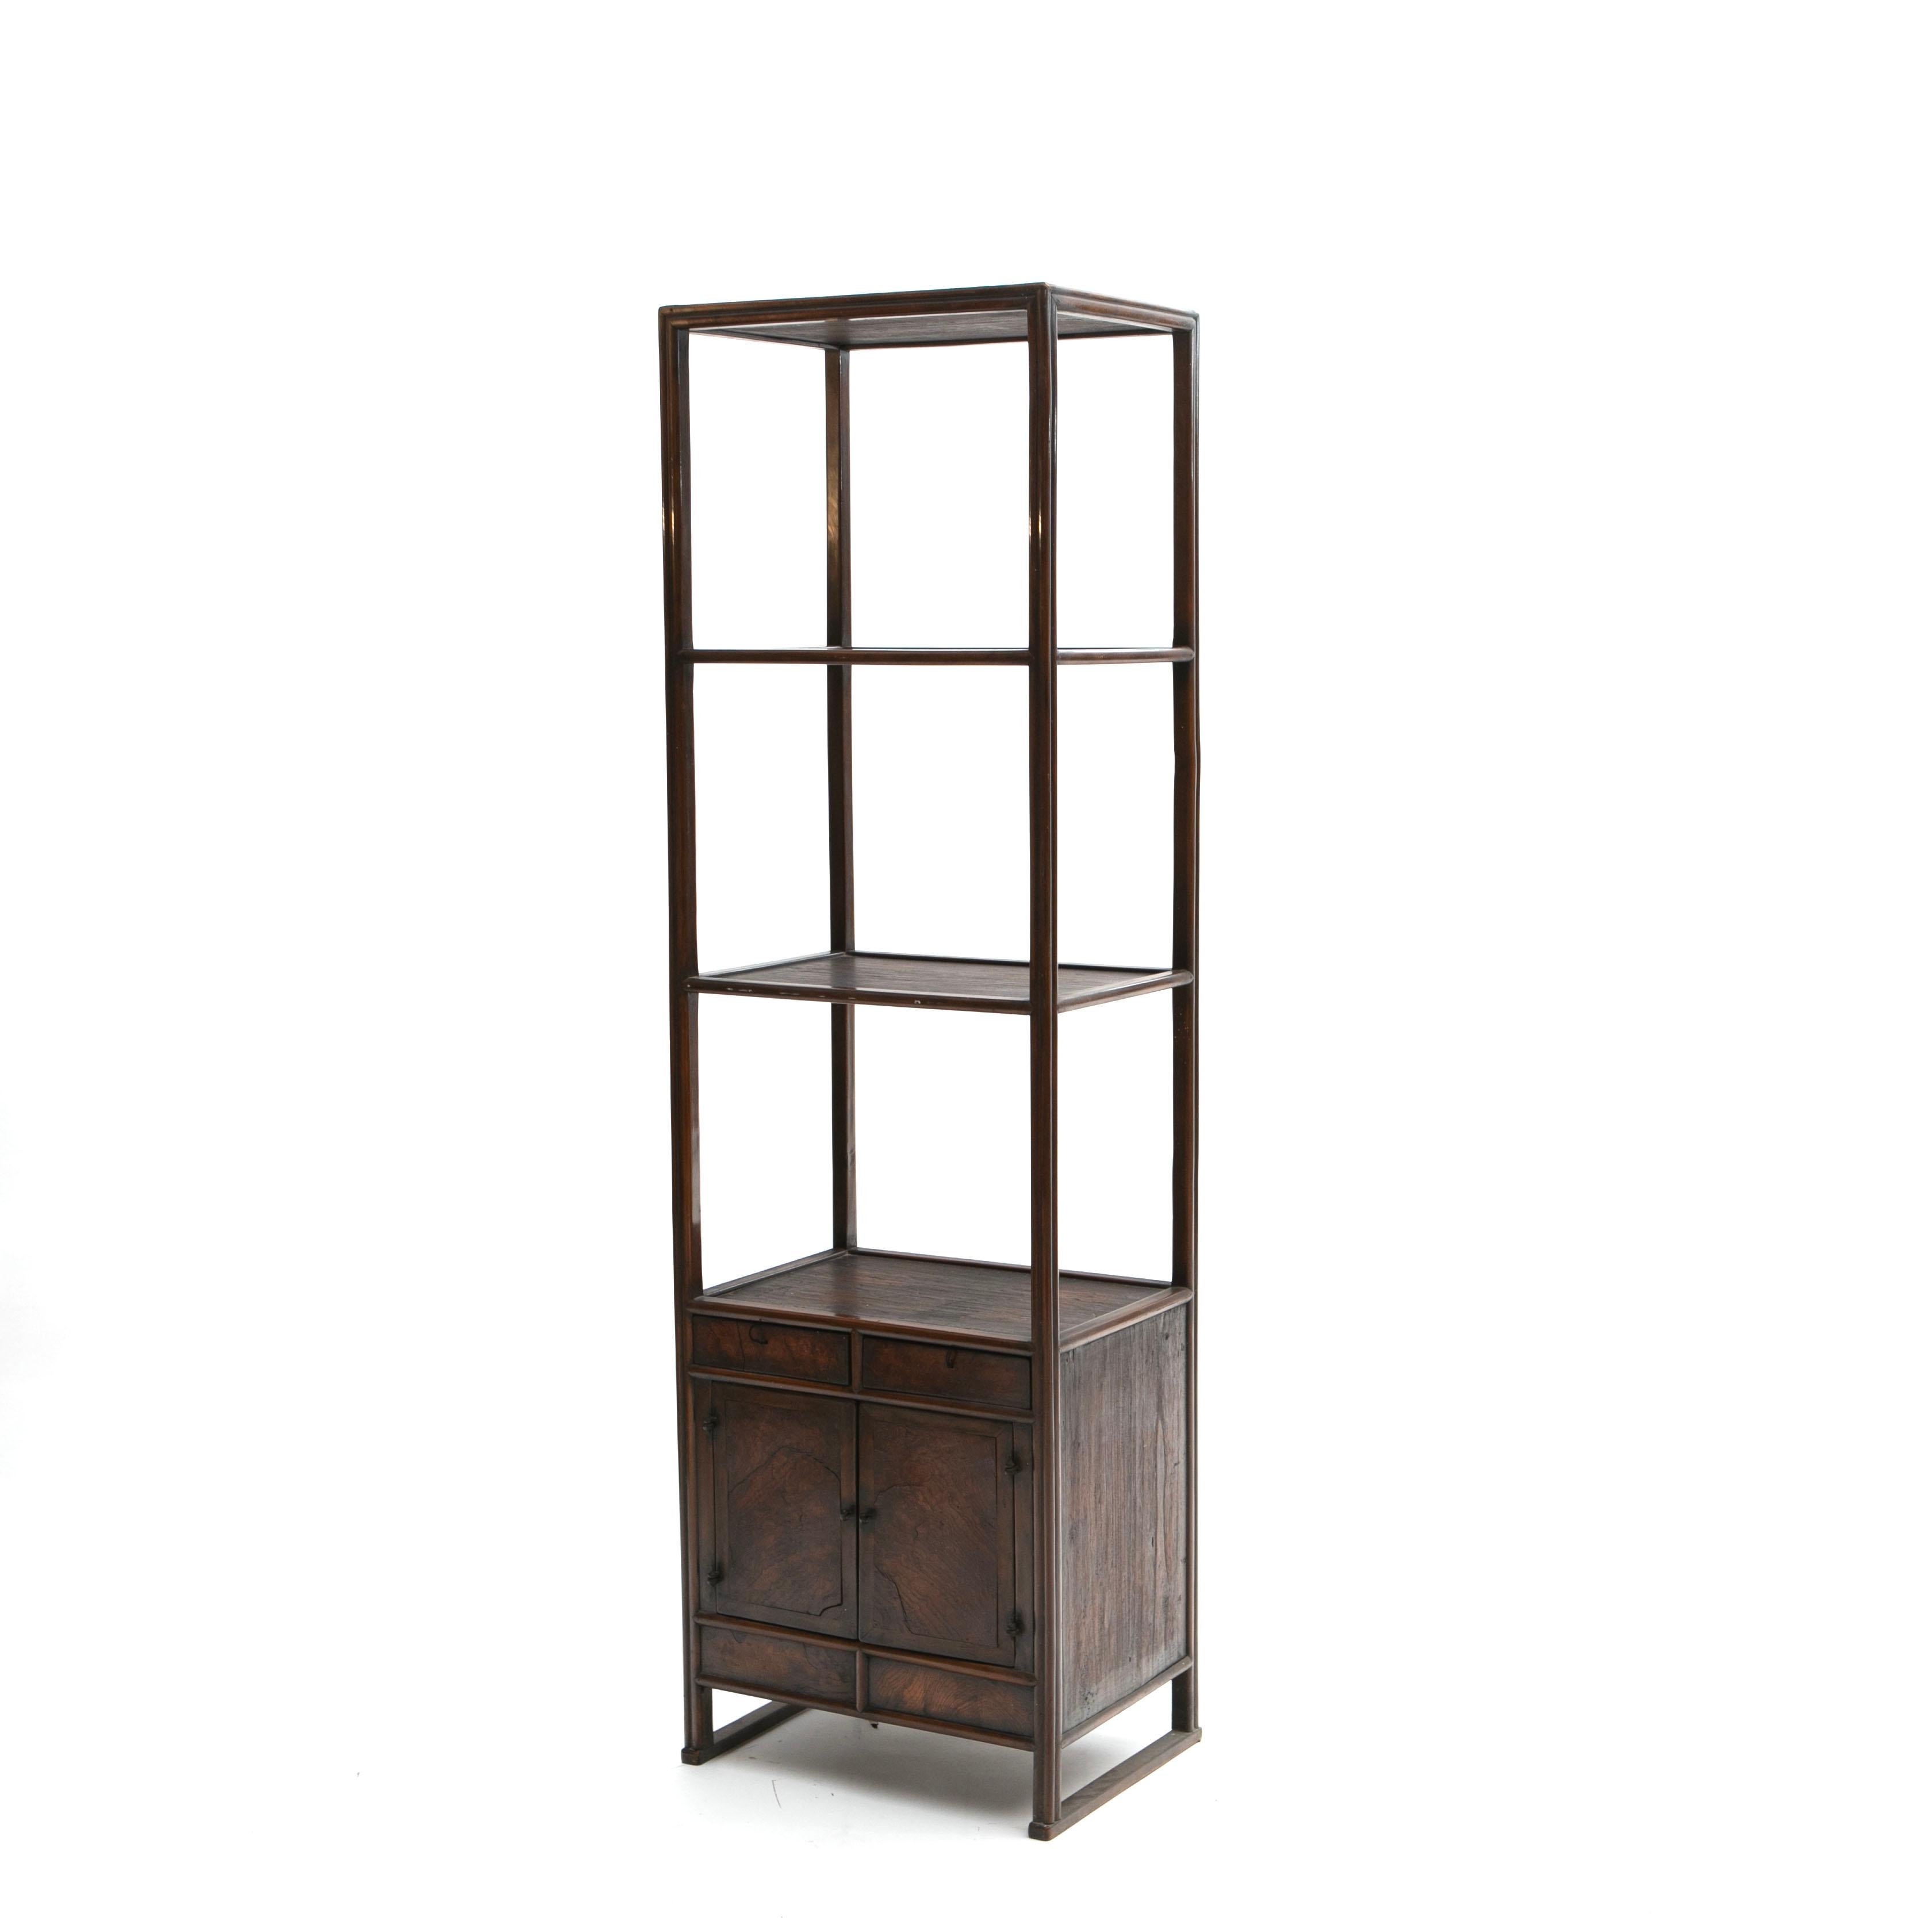 Chinese mid 19th century Ming style etagere with a frame crafted in walnut and burl elm wood fronts on drawers and doors.
Featuring three tiers of shelving over two drawers and lower cupboard for storage.
Jiangsu province, circa 1840-1860

High